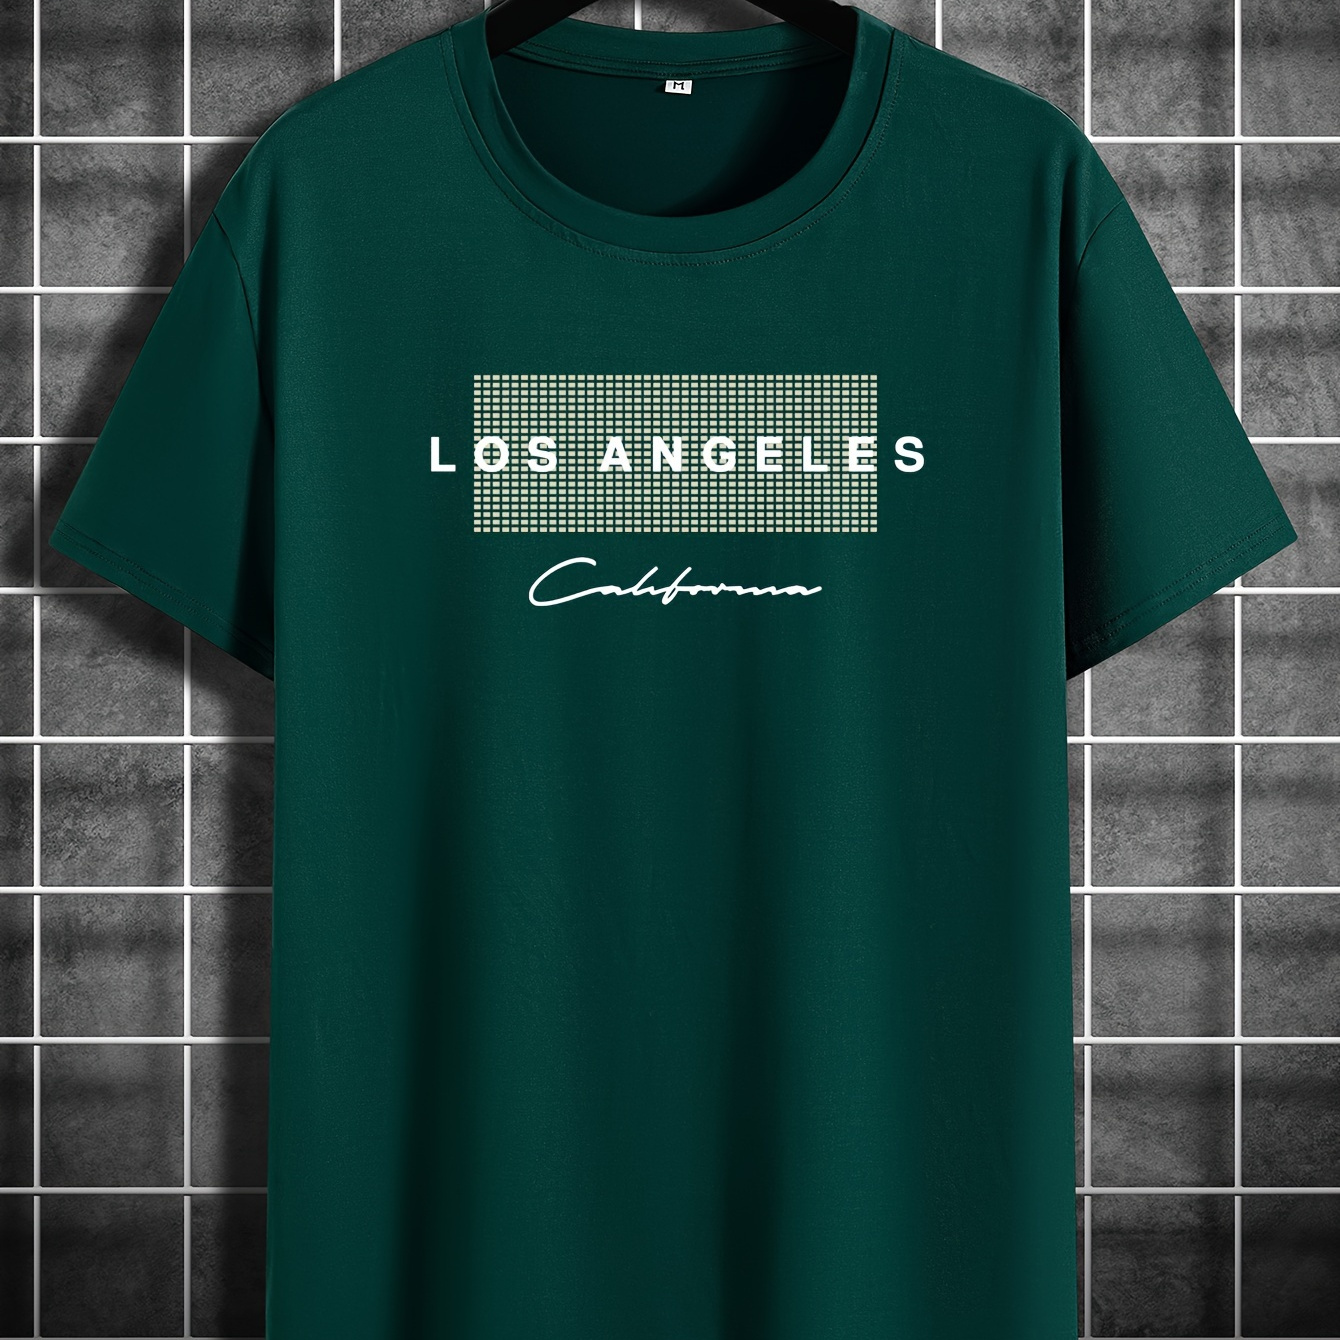 

Men's Geometric Graphic Pattern And Alphabet Print "los Angeles California" Crew Neck And Short Sleeve T-shirt For Summer Leisurewear, Chic And Casual Tops For Men